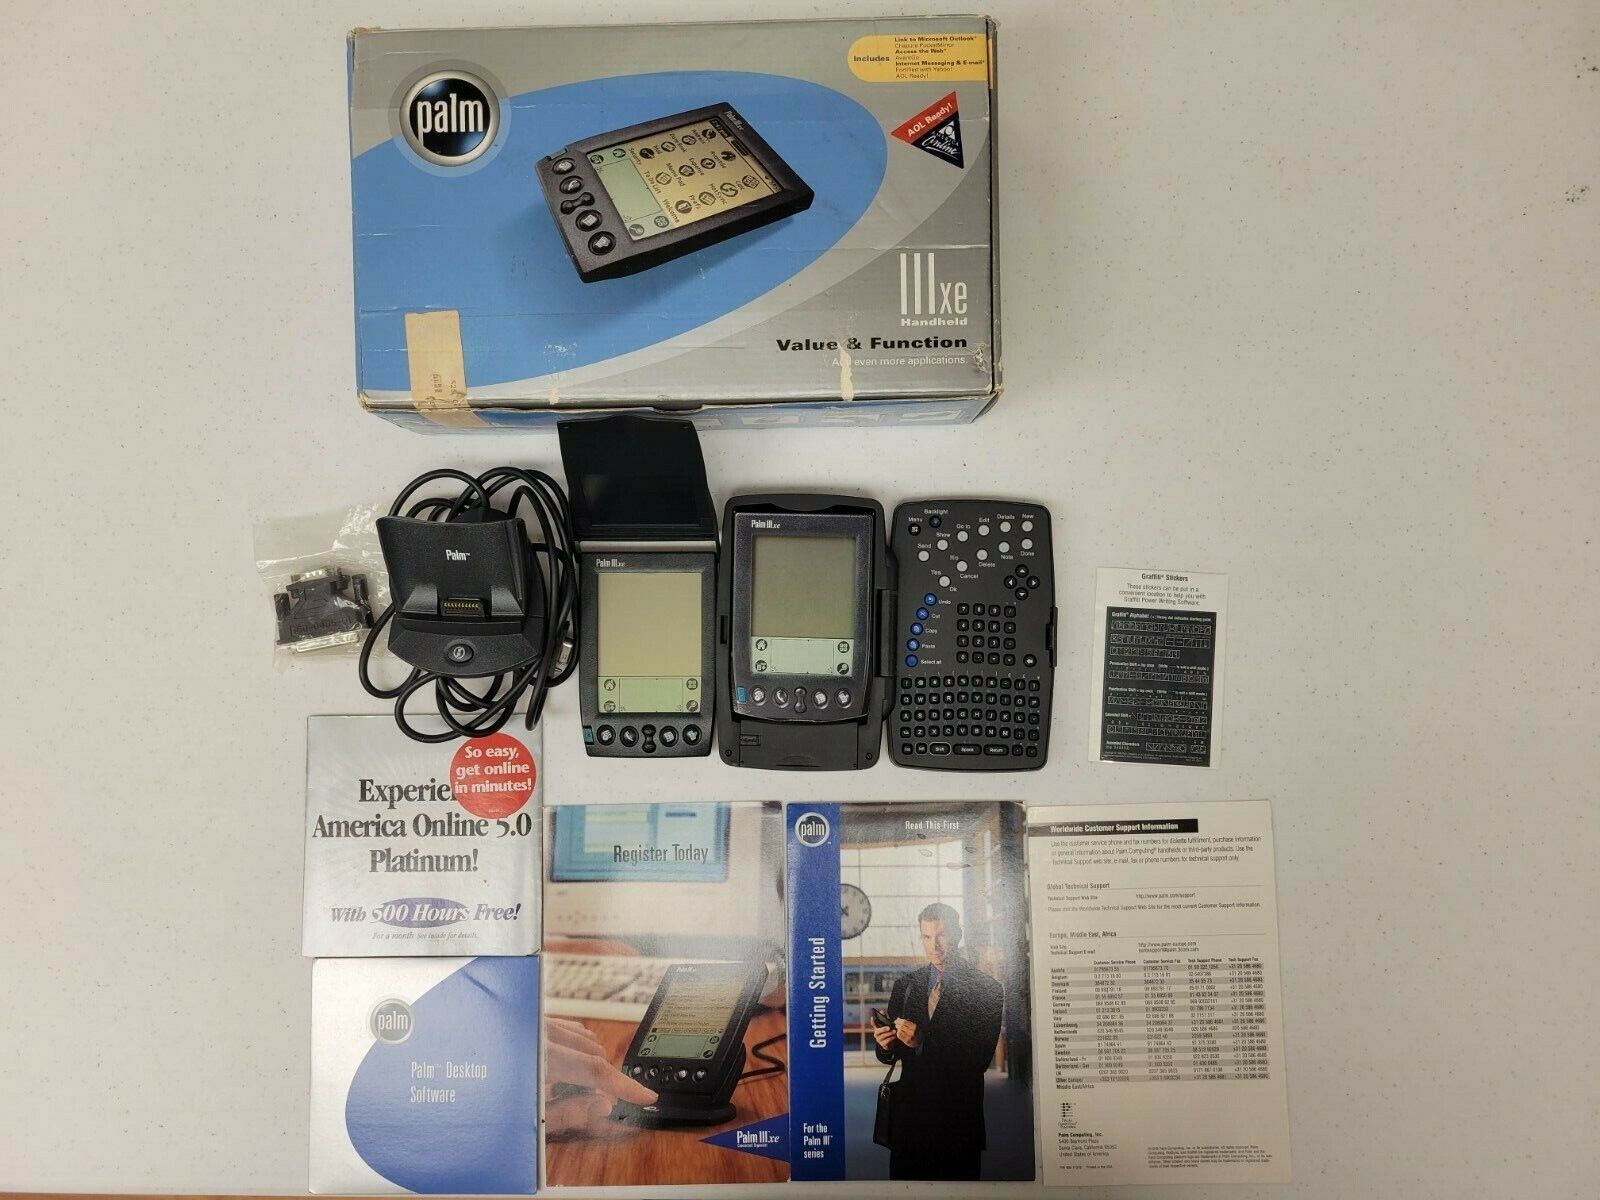 Palm Iiixe Handheld With Original Box And Accessories